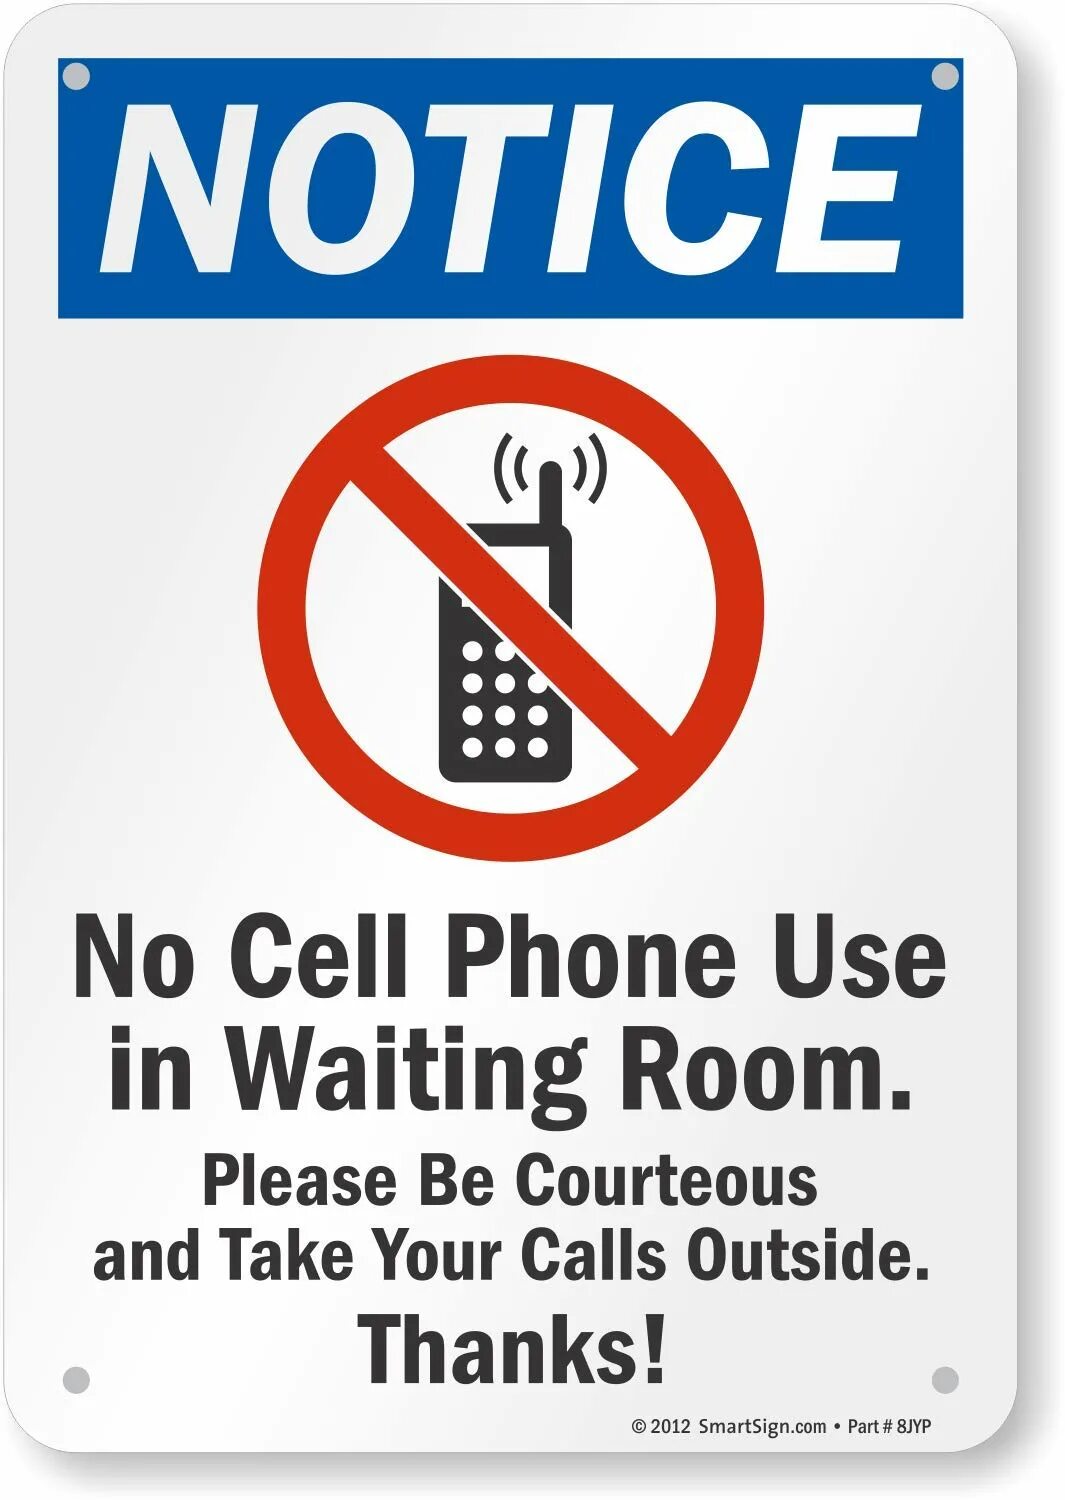 No cellphone use sign. No Phone sign. Take no Notice. Not using Phone.